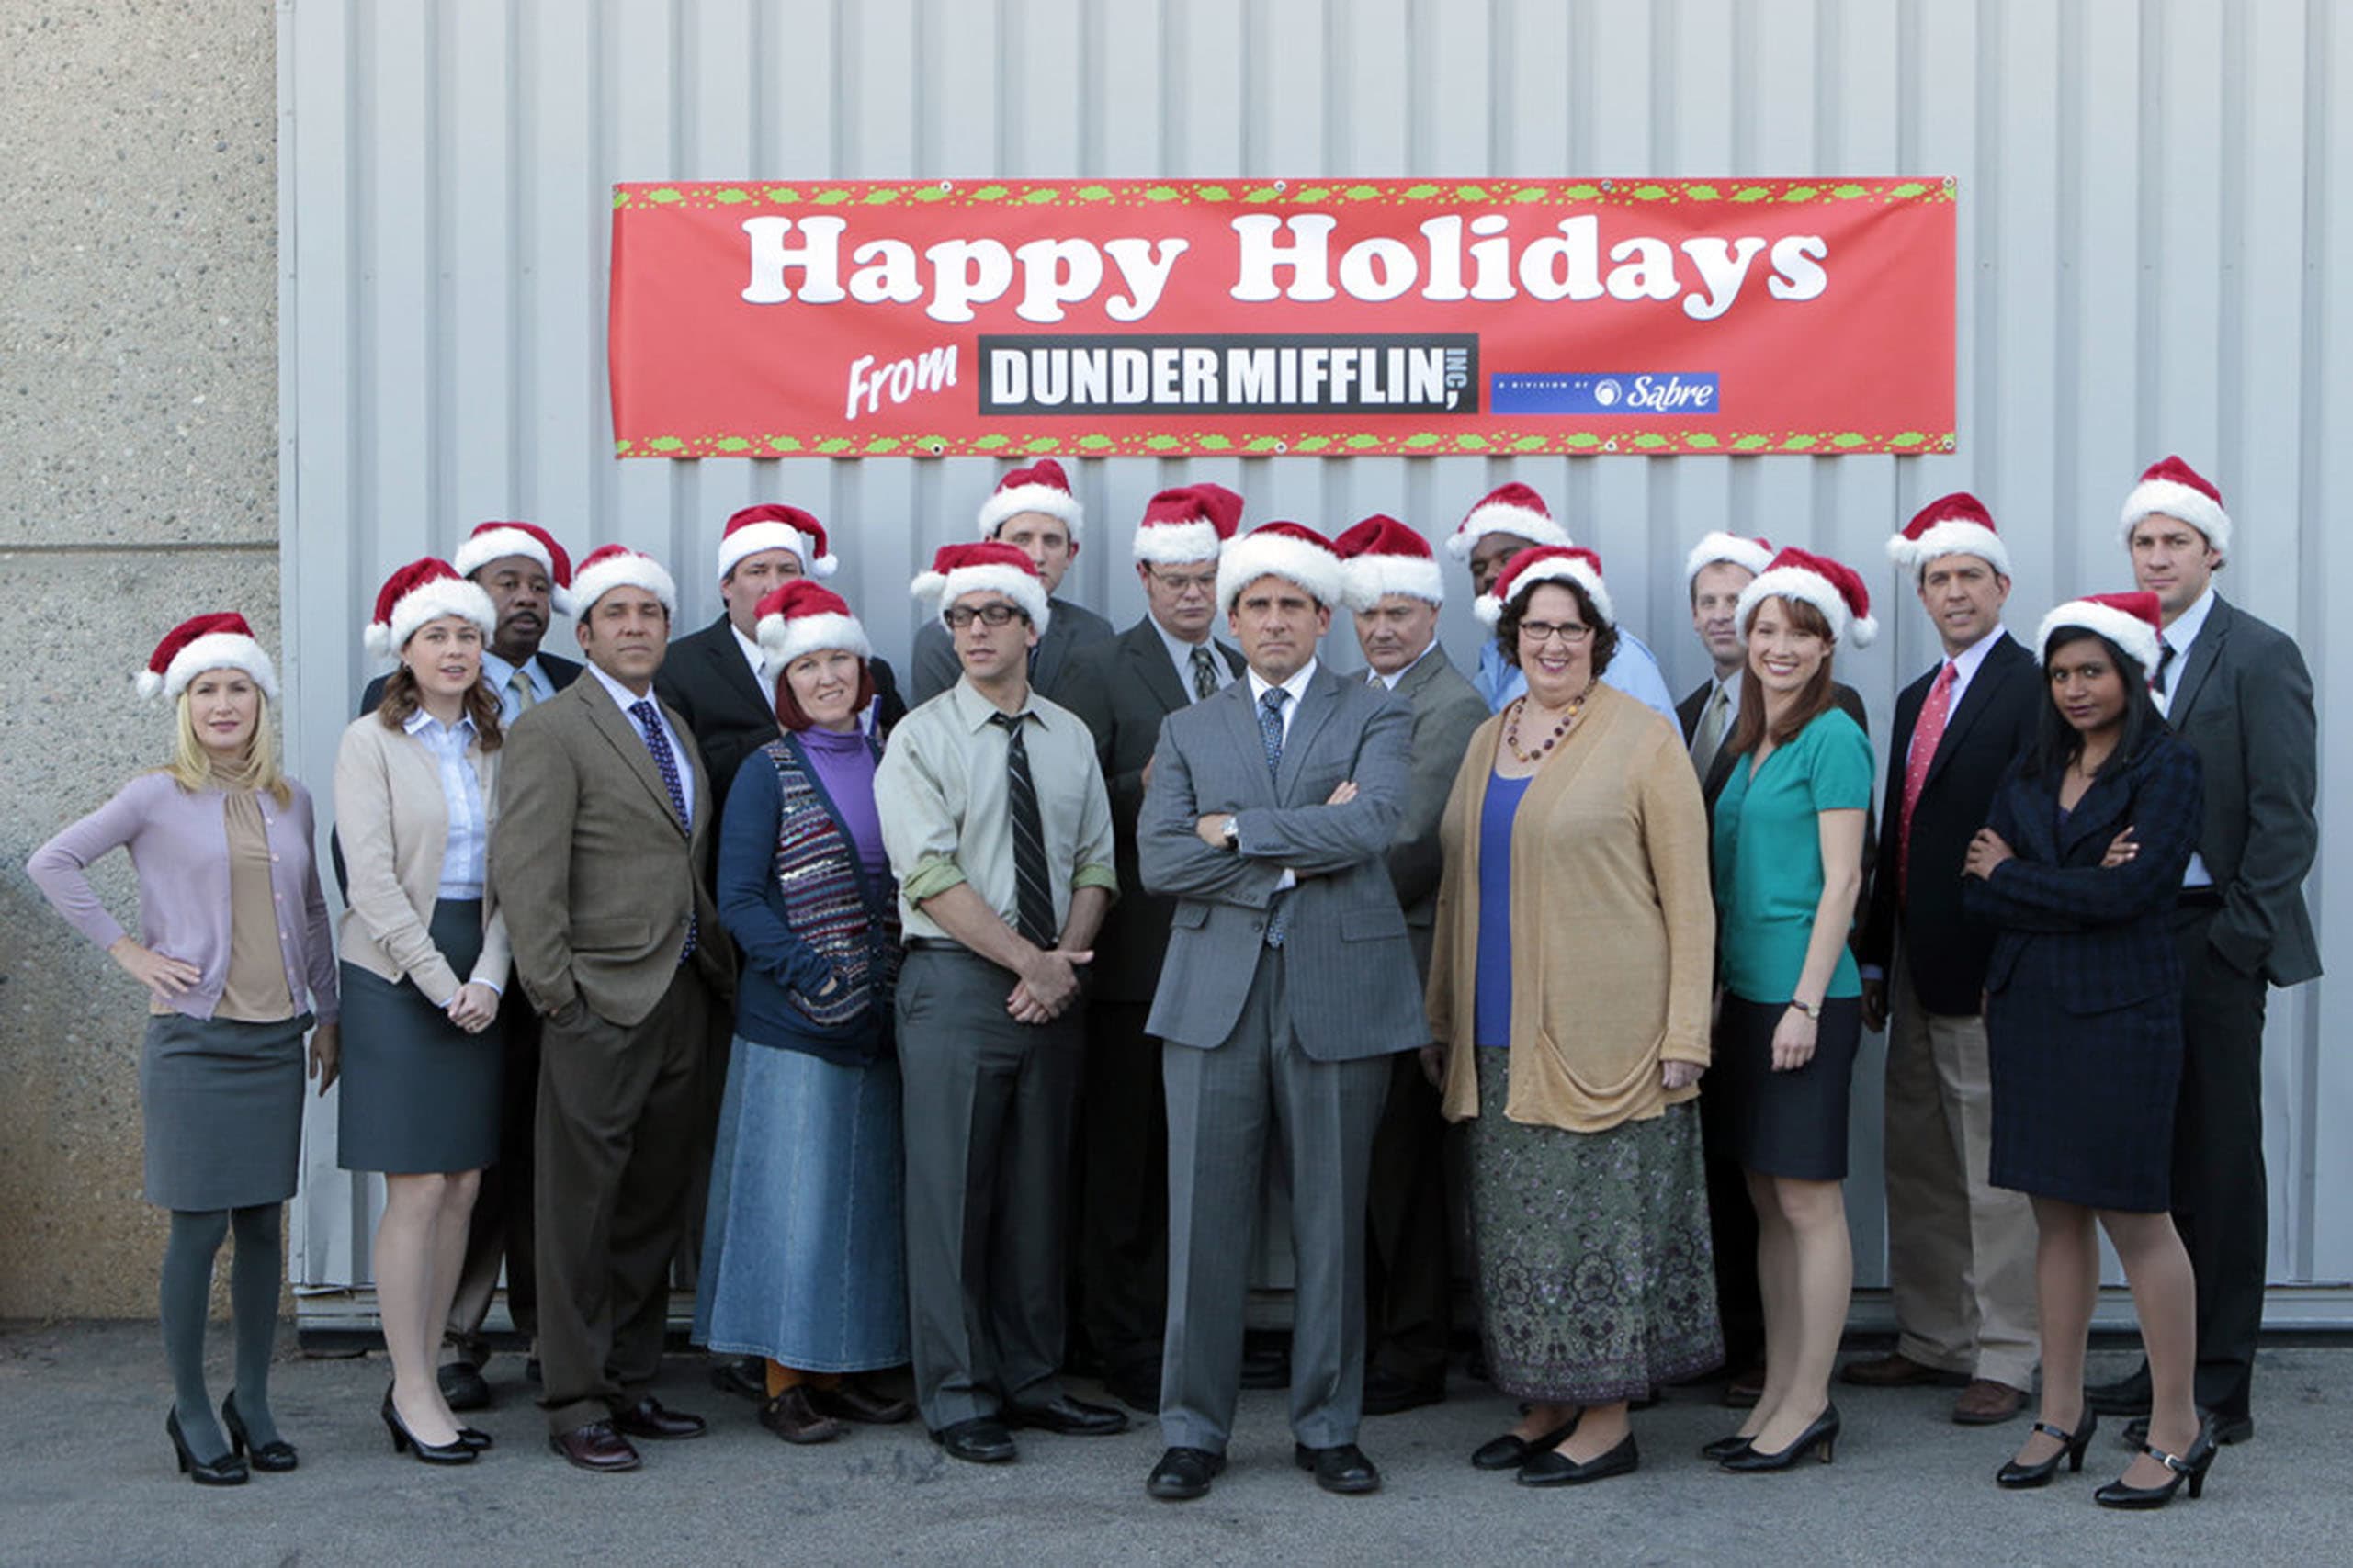 Download The Office Christmas Episodes Ranked By Joy And Awkwardness SVG Cut Files